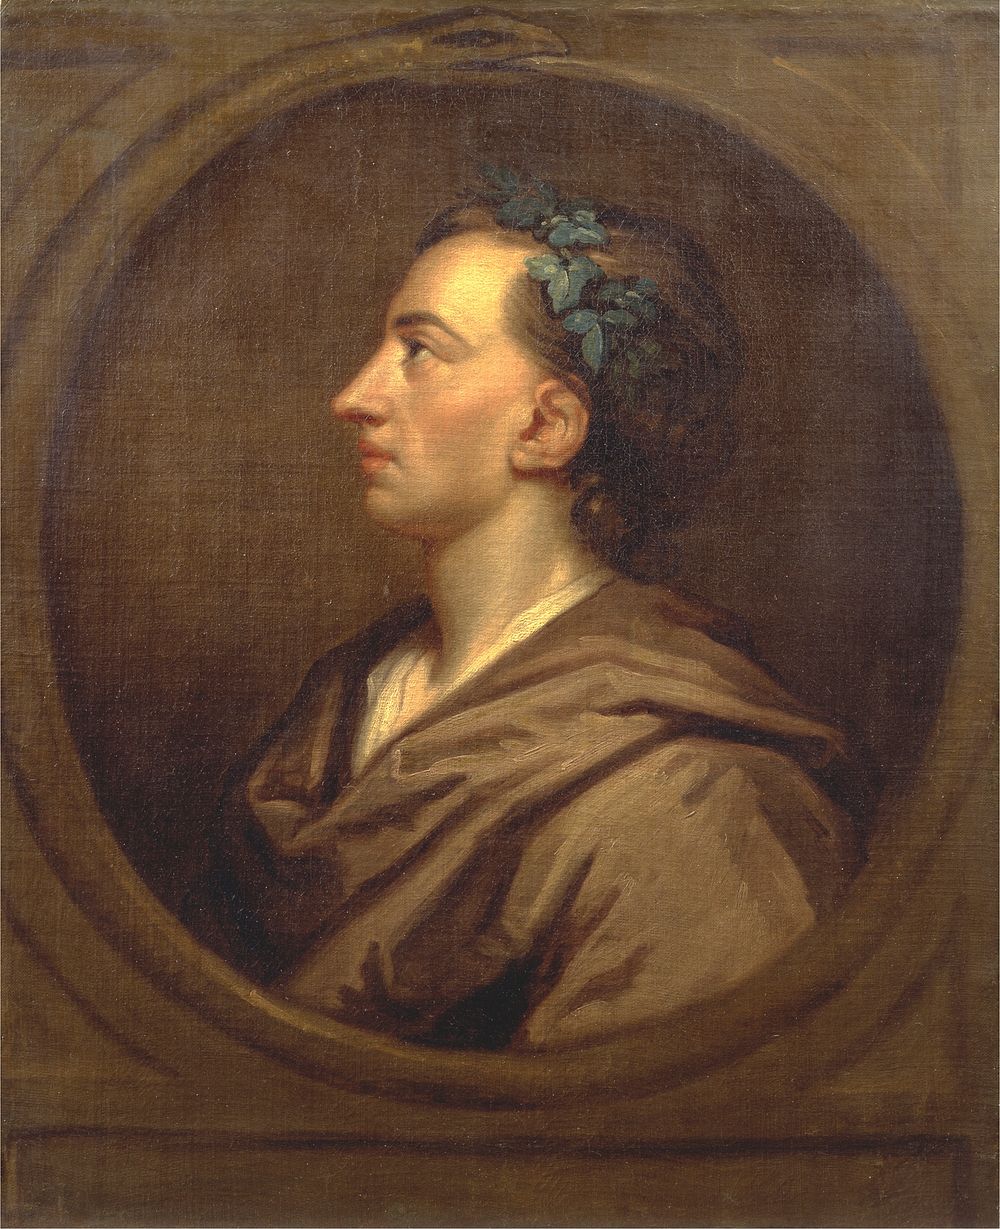 Alexander Pope Profile, Crowned with Ivy, Studio of Sir Godfrey Kneller